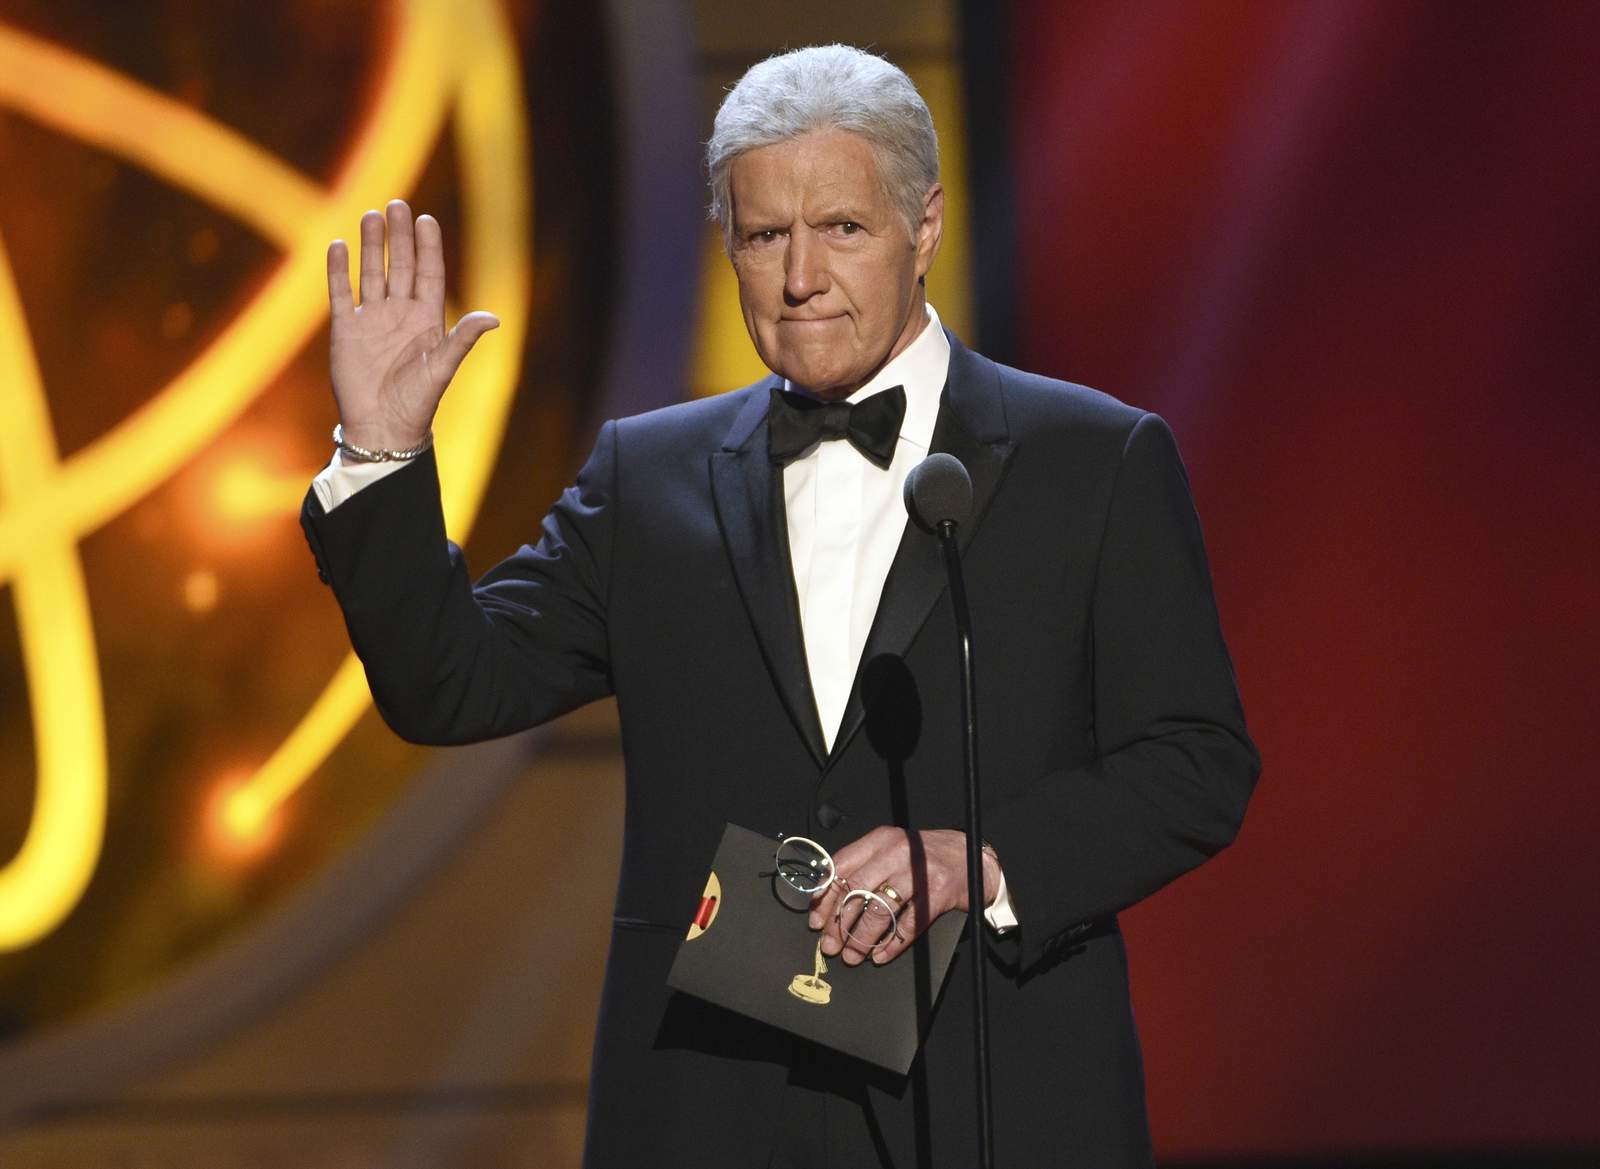 Trebek remembered for grace that elevated him above TV host